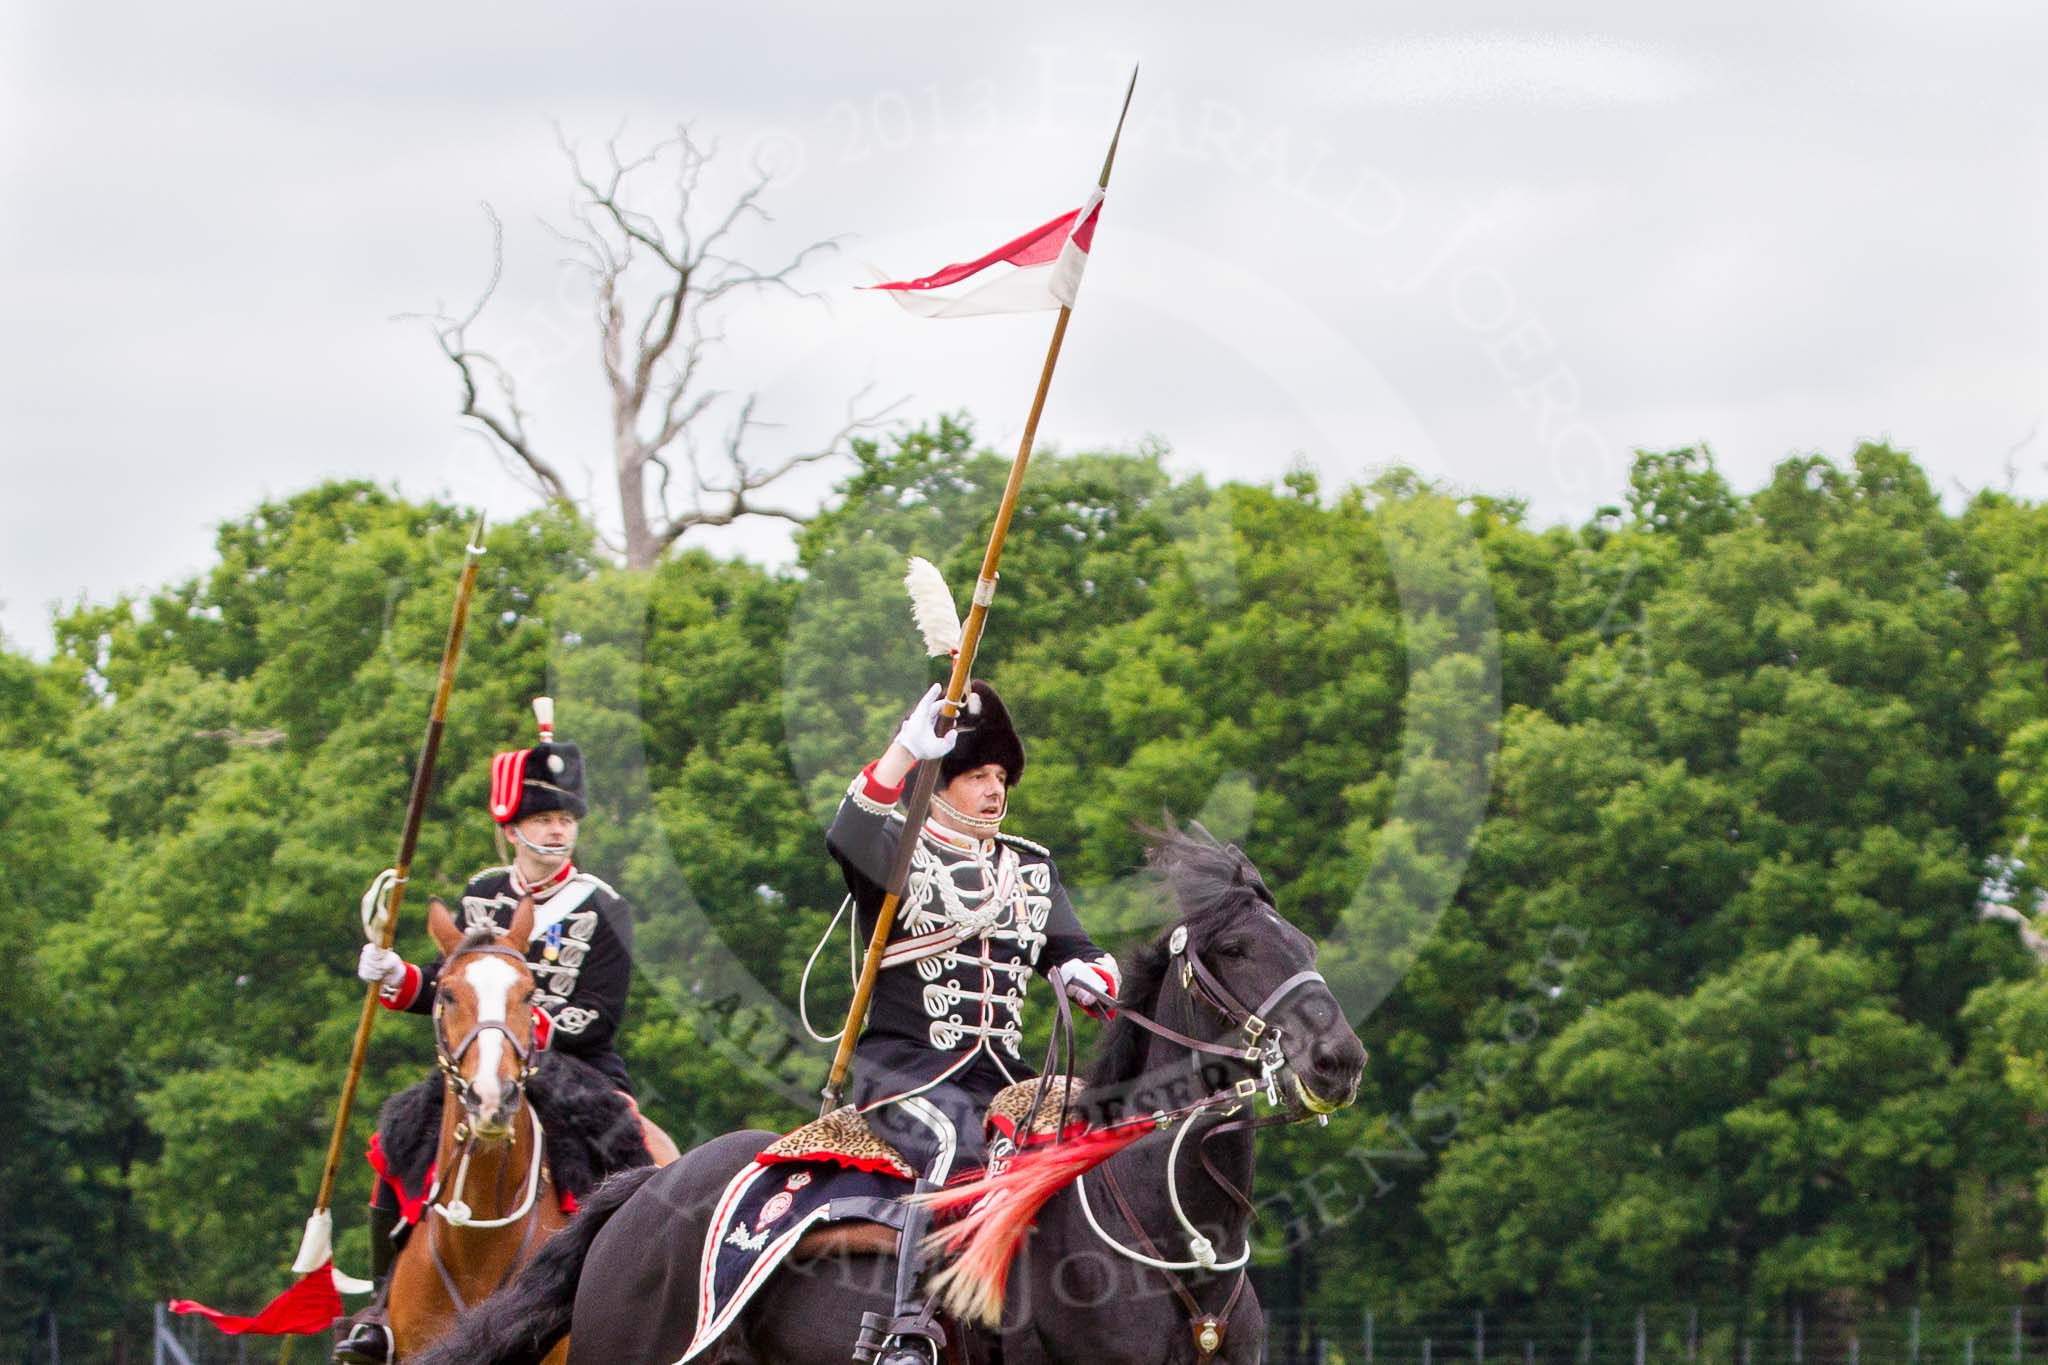 The Light Cavalry HAC Annual Review and Inspection 2013.
Windsor Great Park Review Ground,
Windsor,
Berkshire,
United Kingdom,
on 09 June 2013 at 14:38, image #563